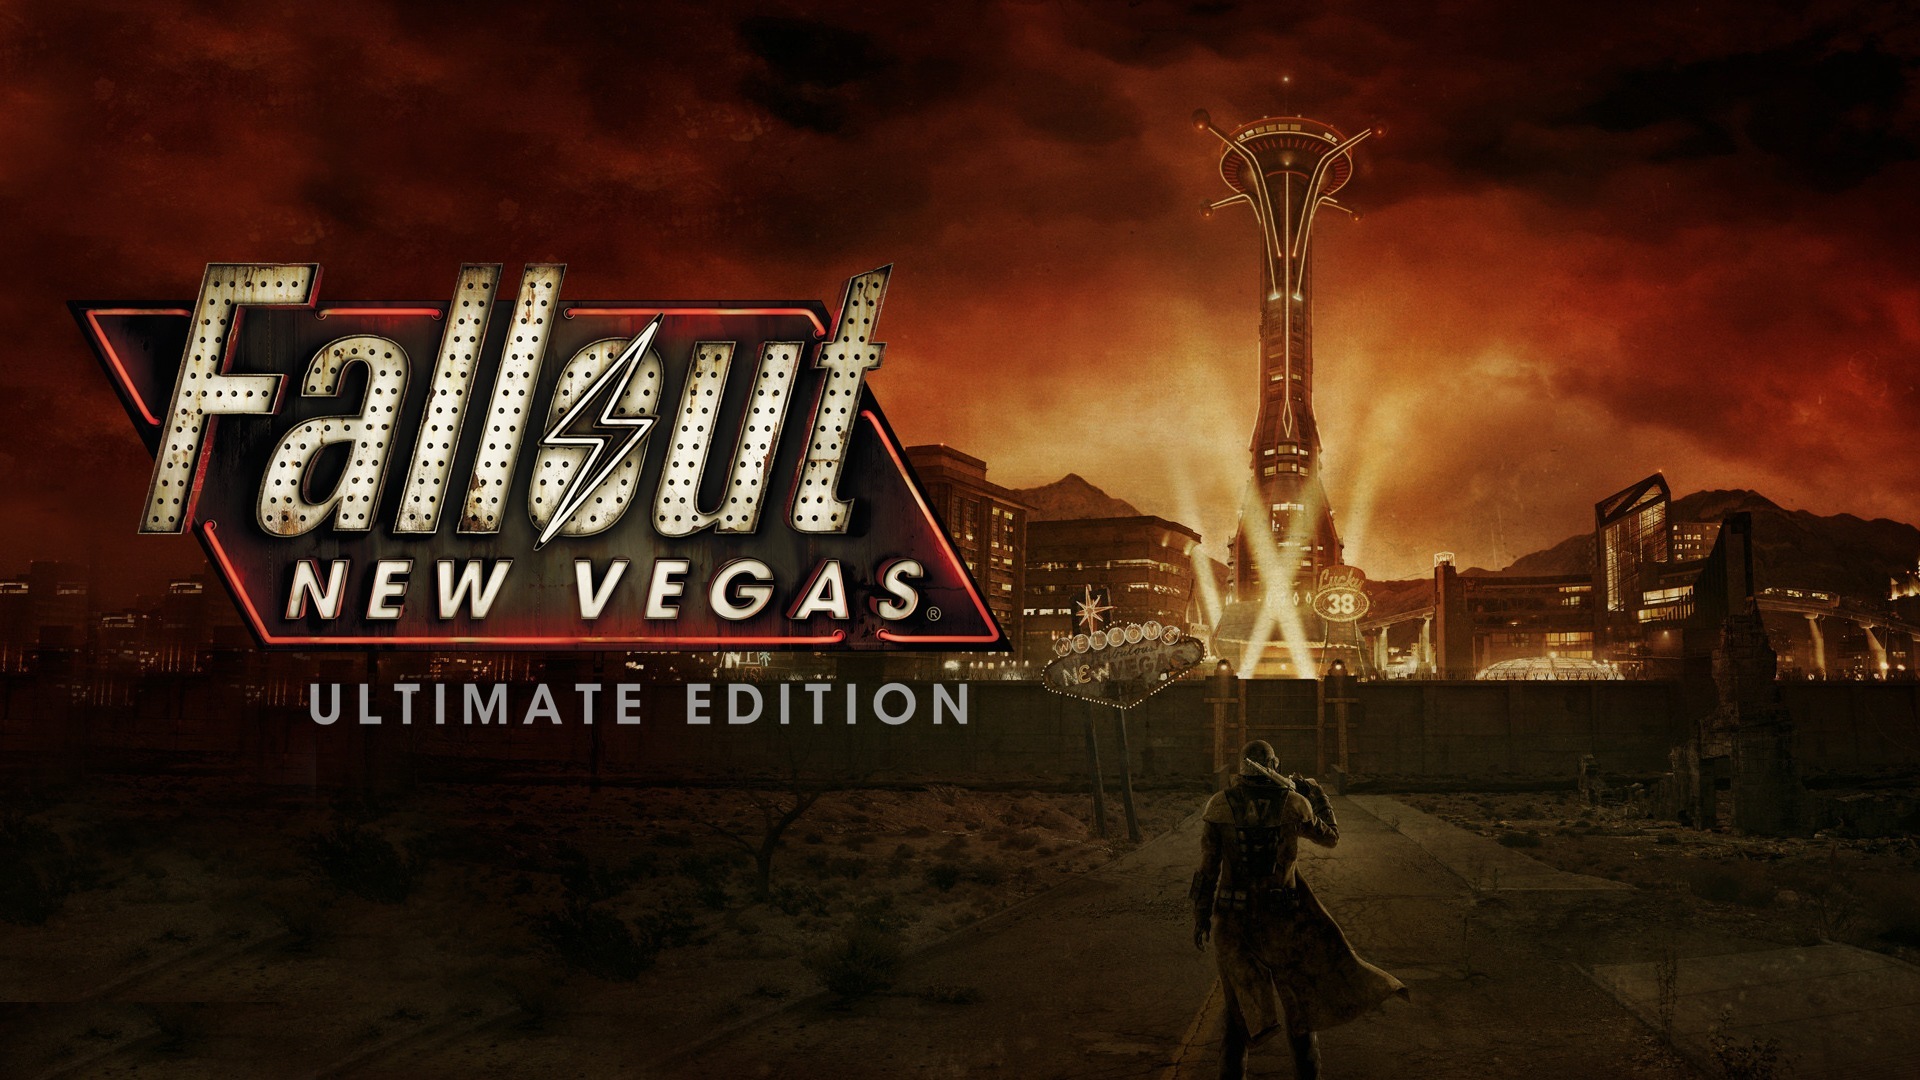 fallout new vegas save games